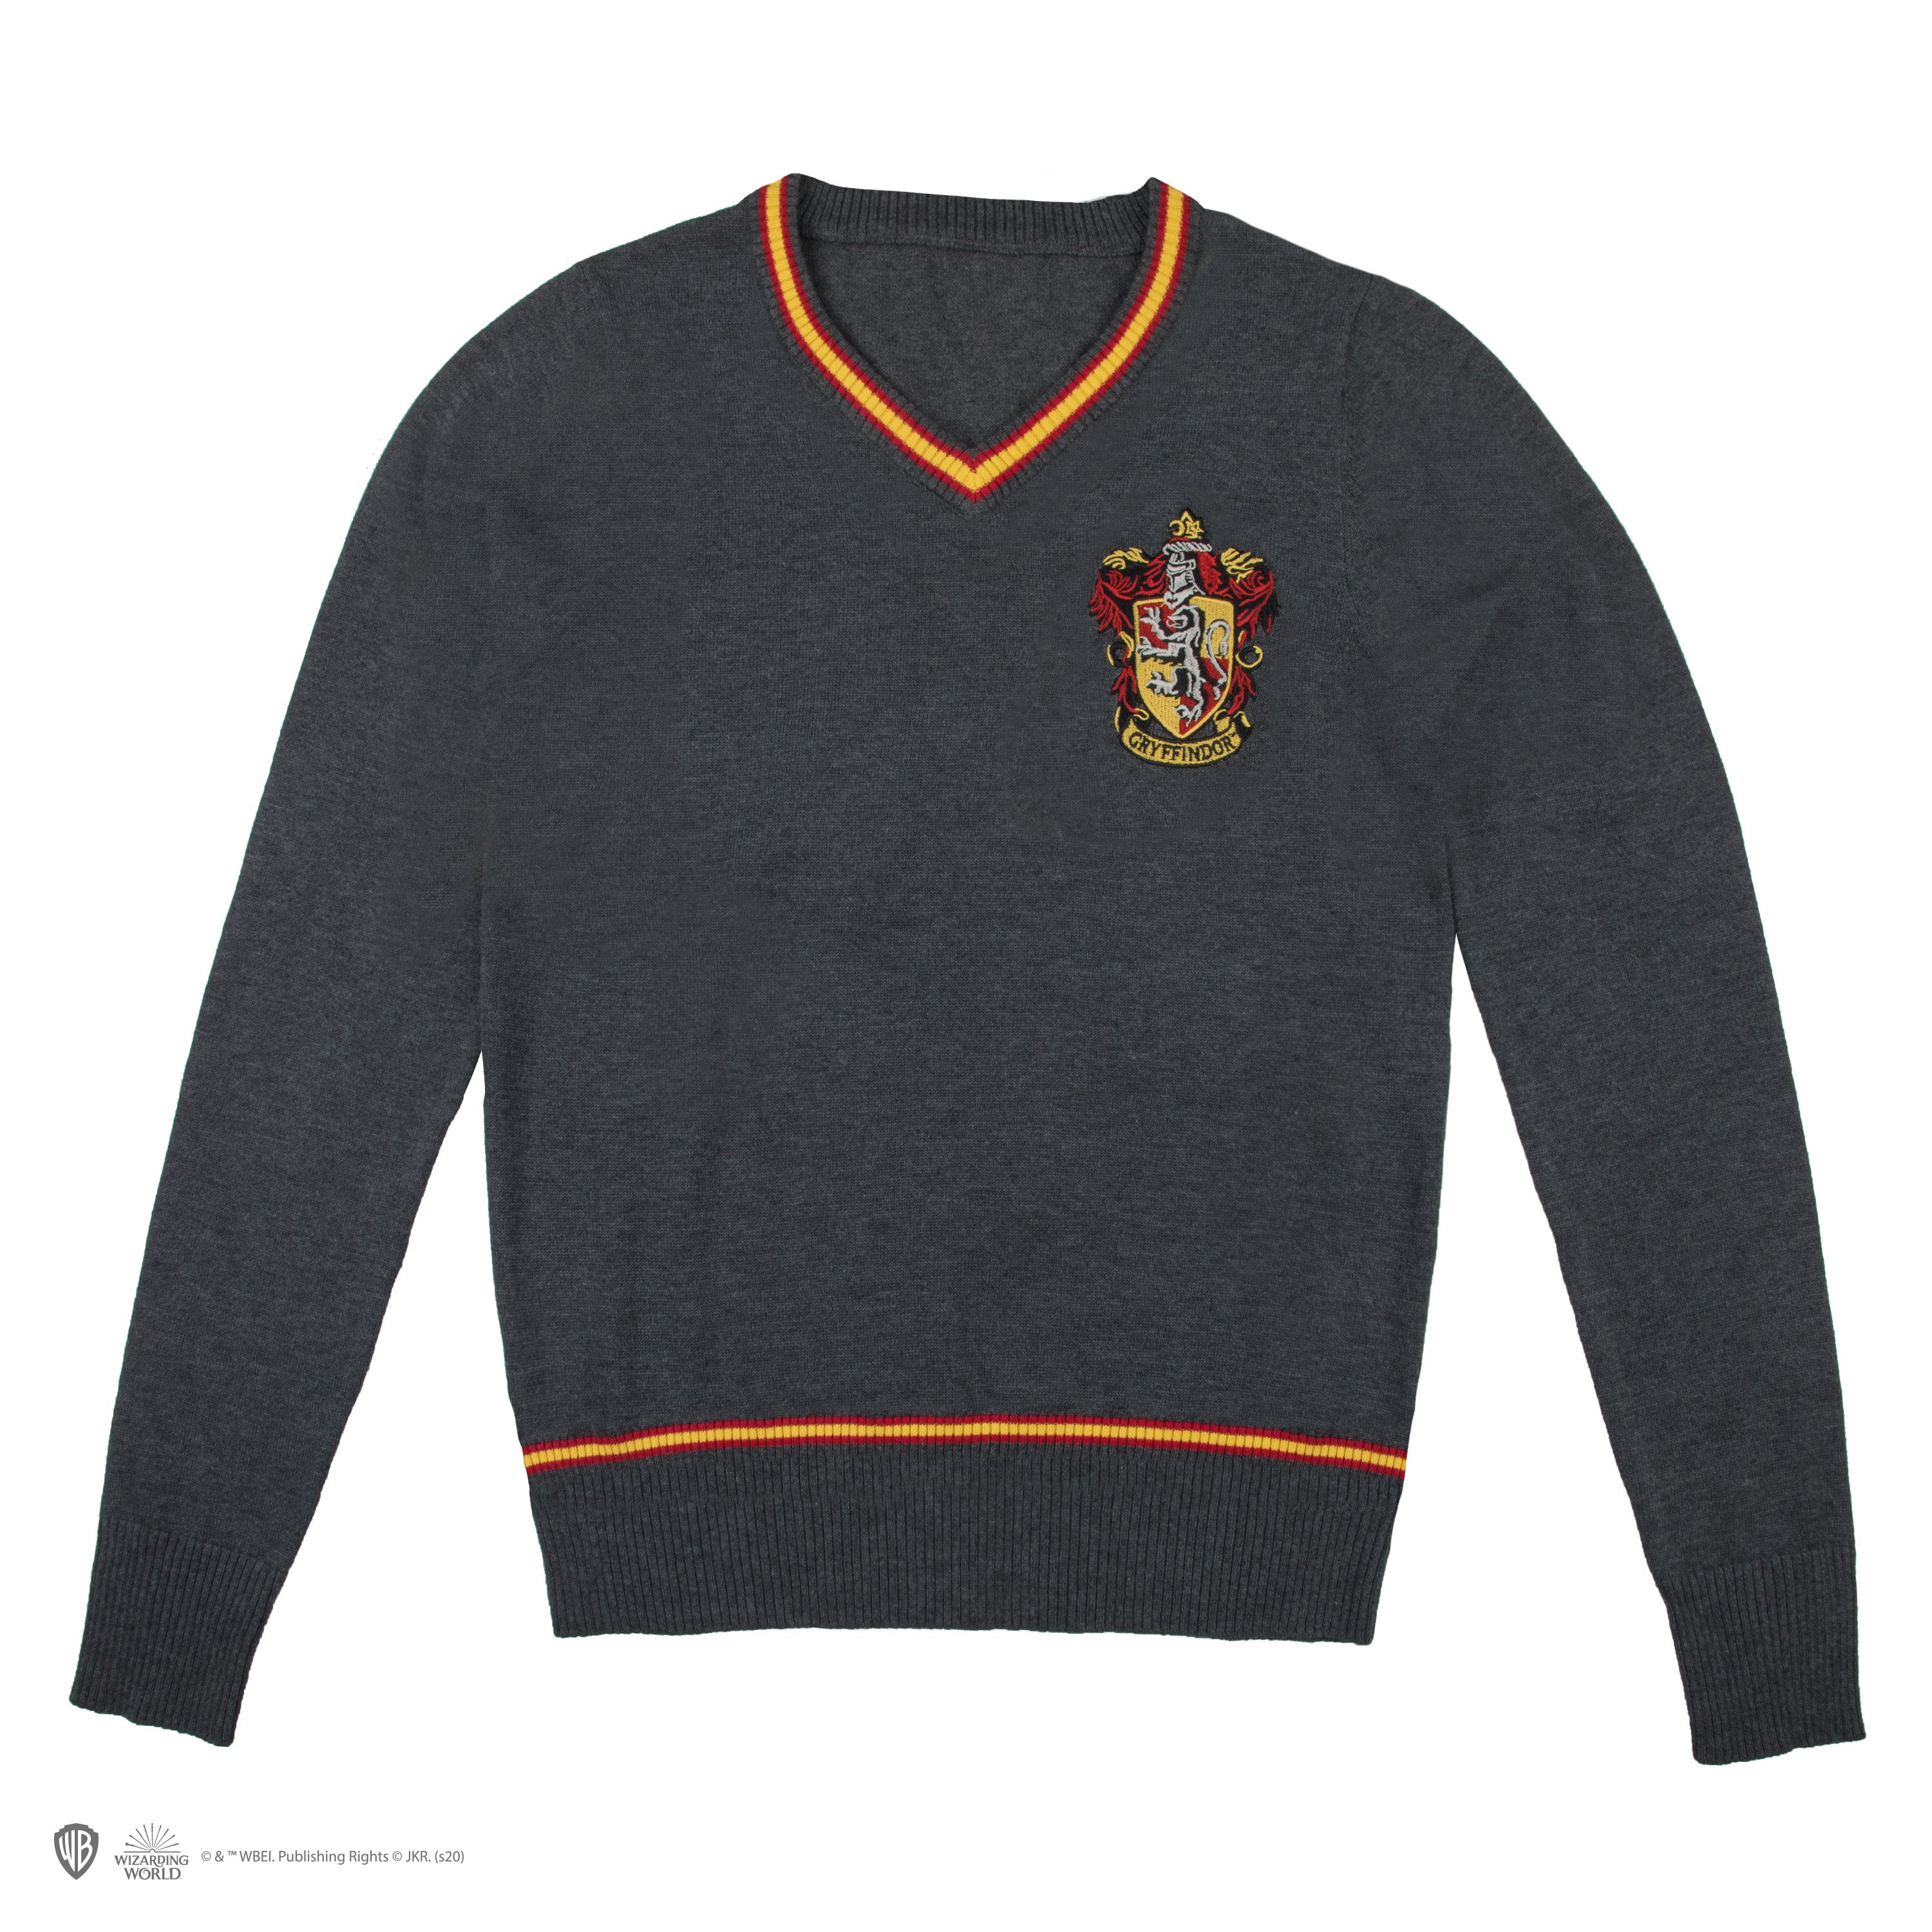 Harry Potter - Gryffindor - Grey Knitted Sweater - X-Small